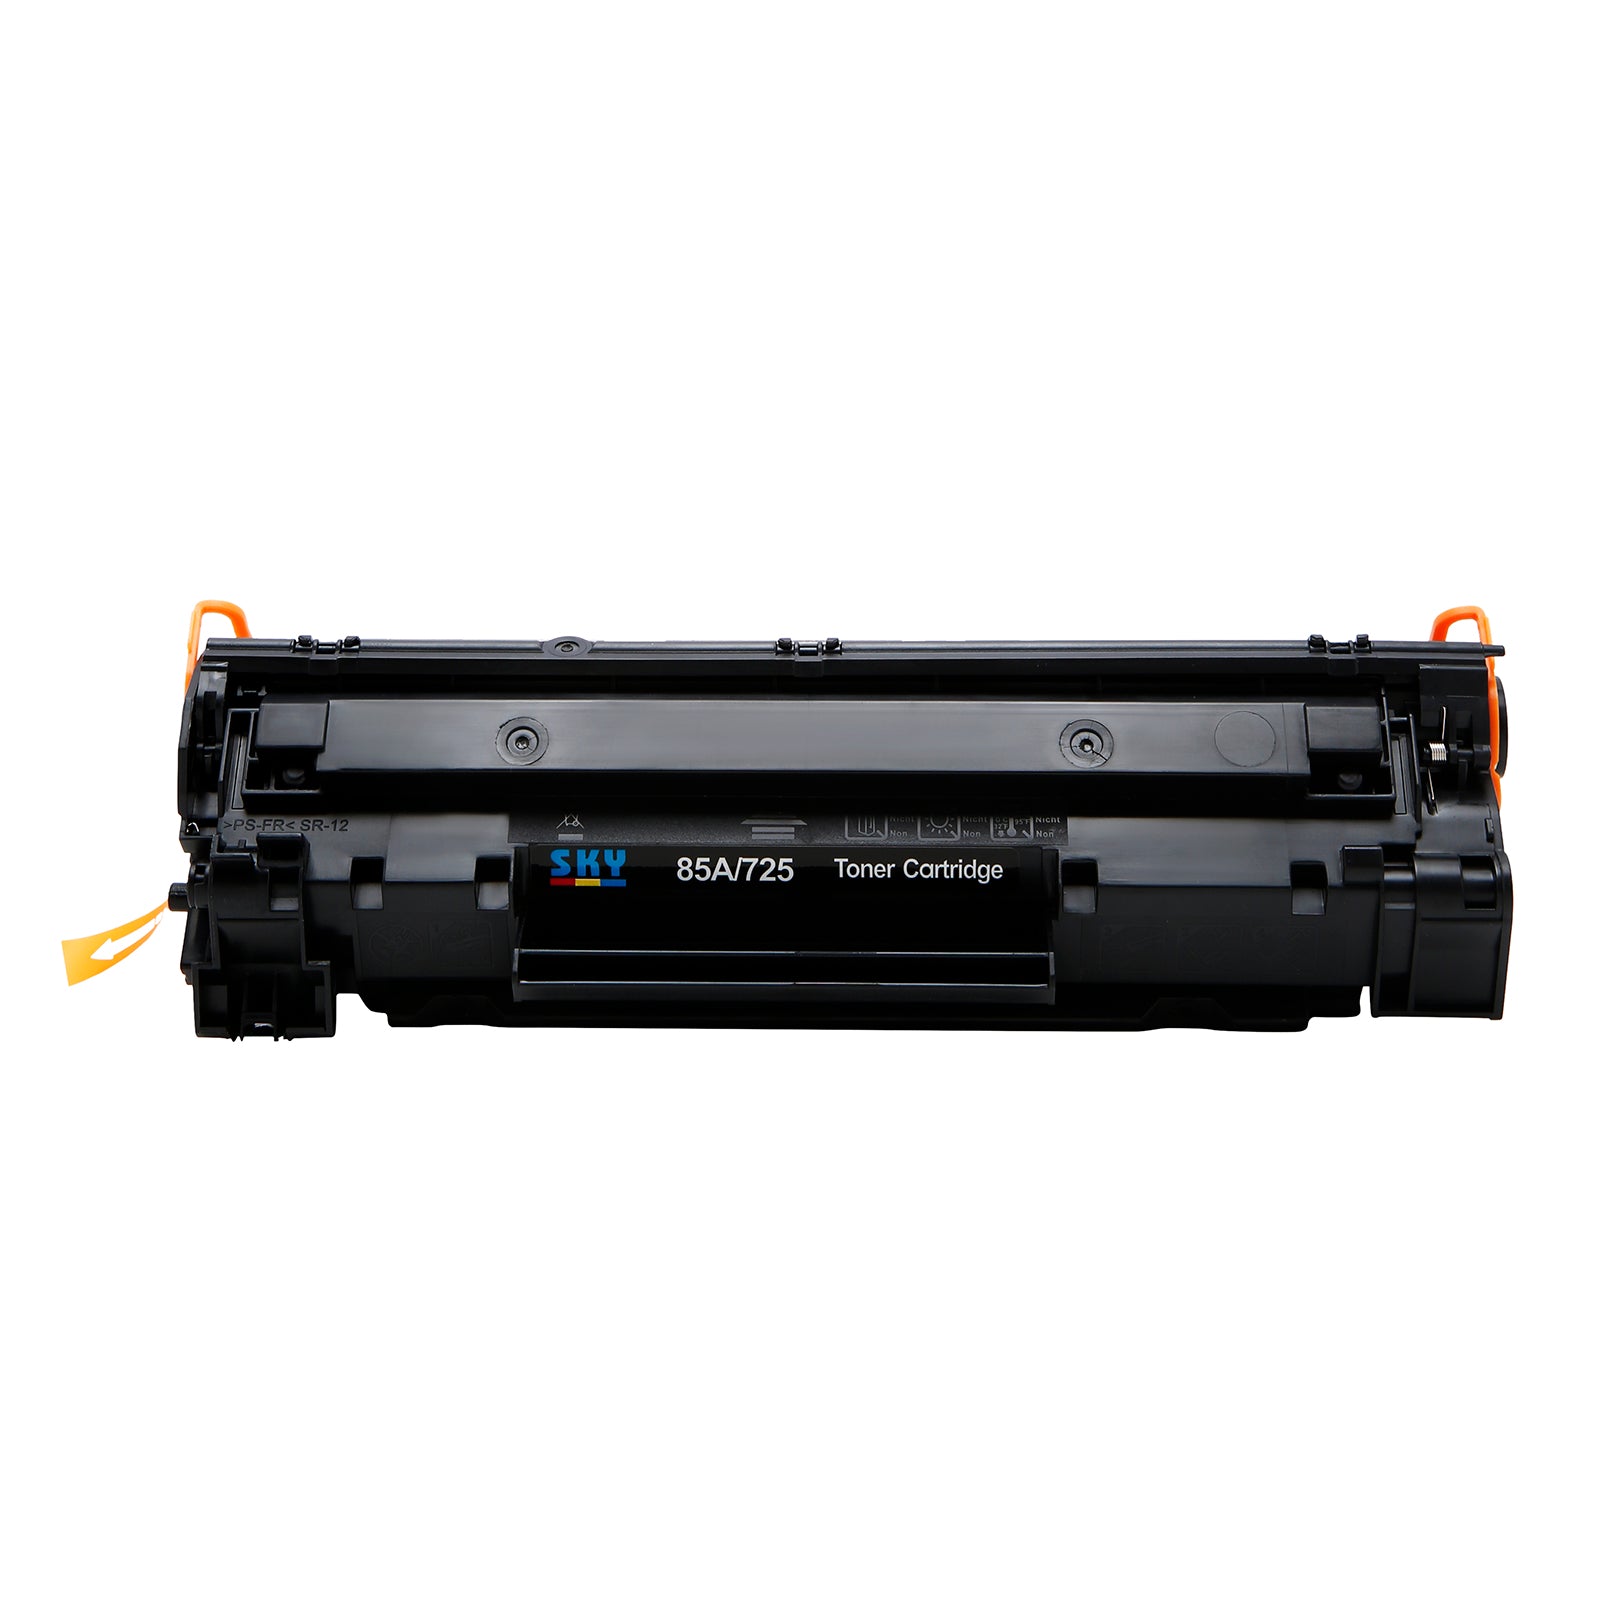 SKY Compatible Toner Cartridge for LBP 6030 LBP6000 6020 and MF3010 Printers